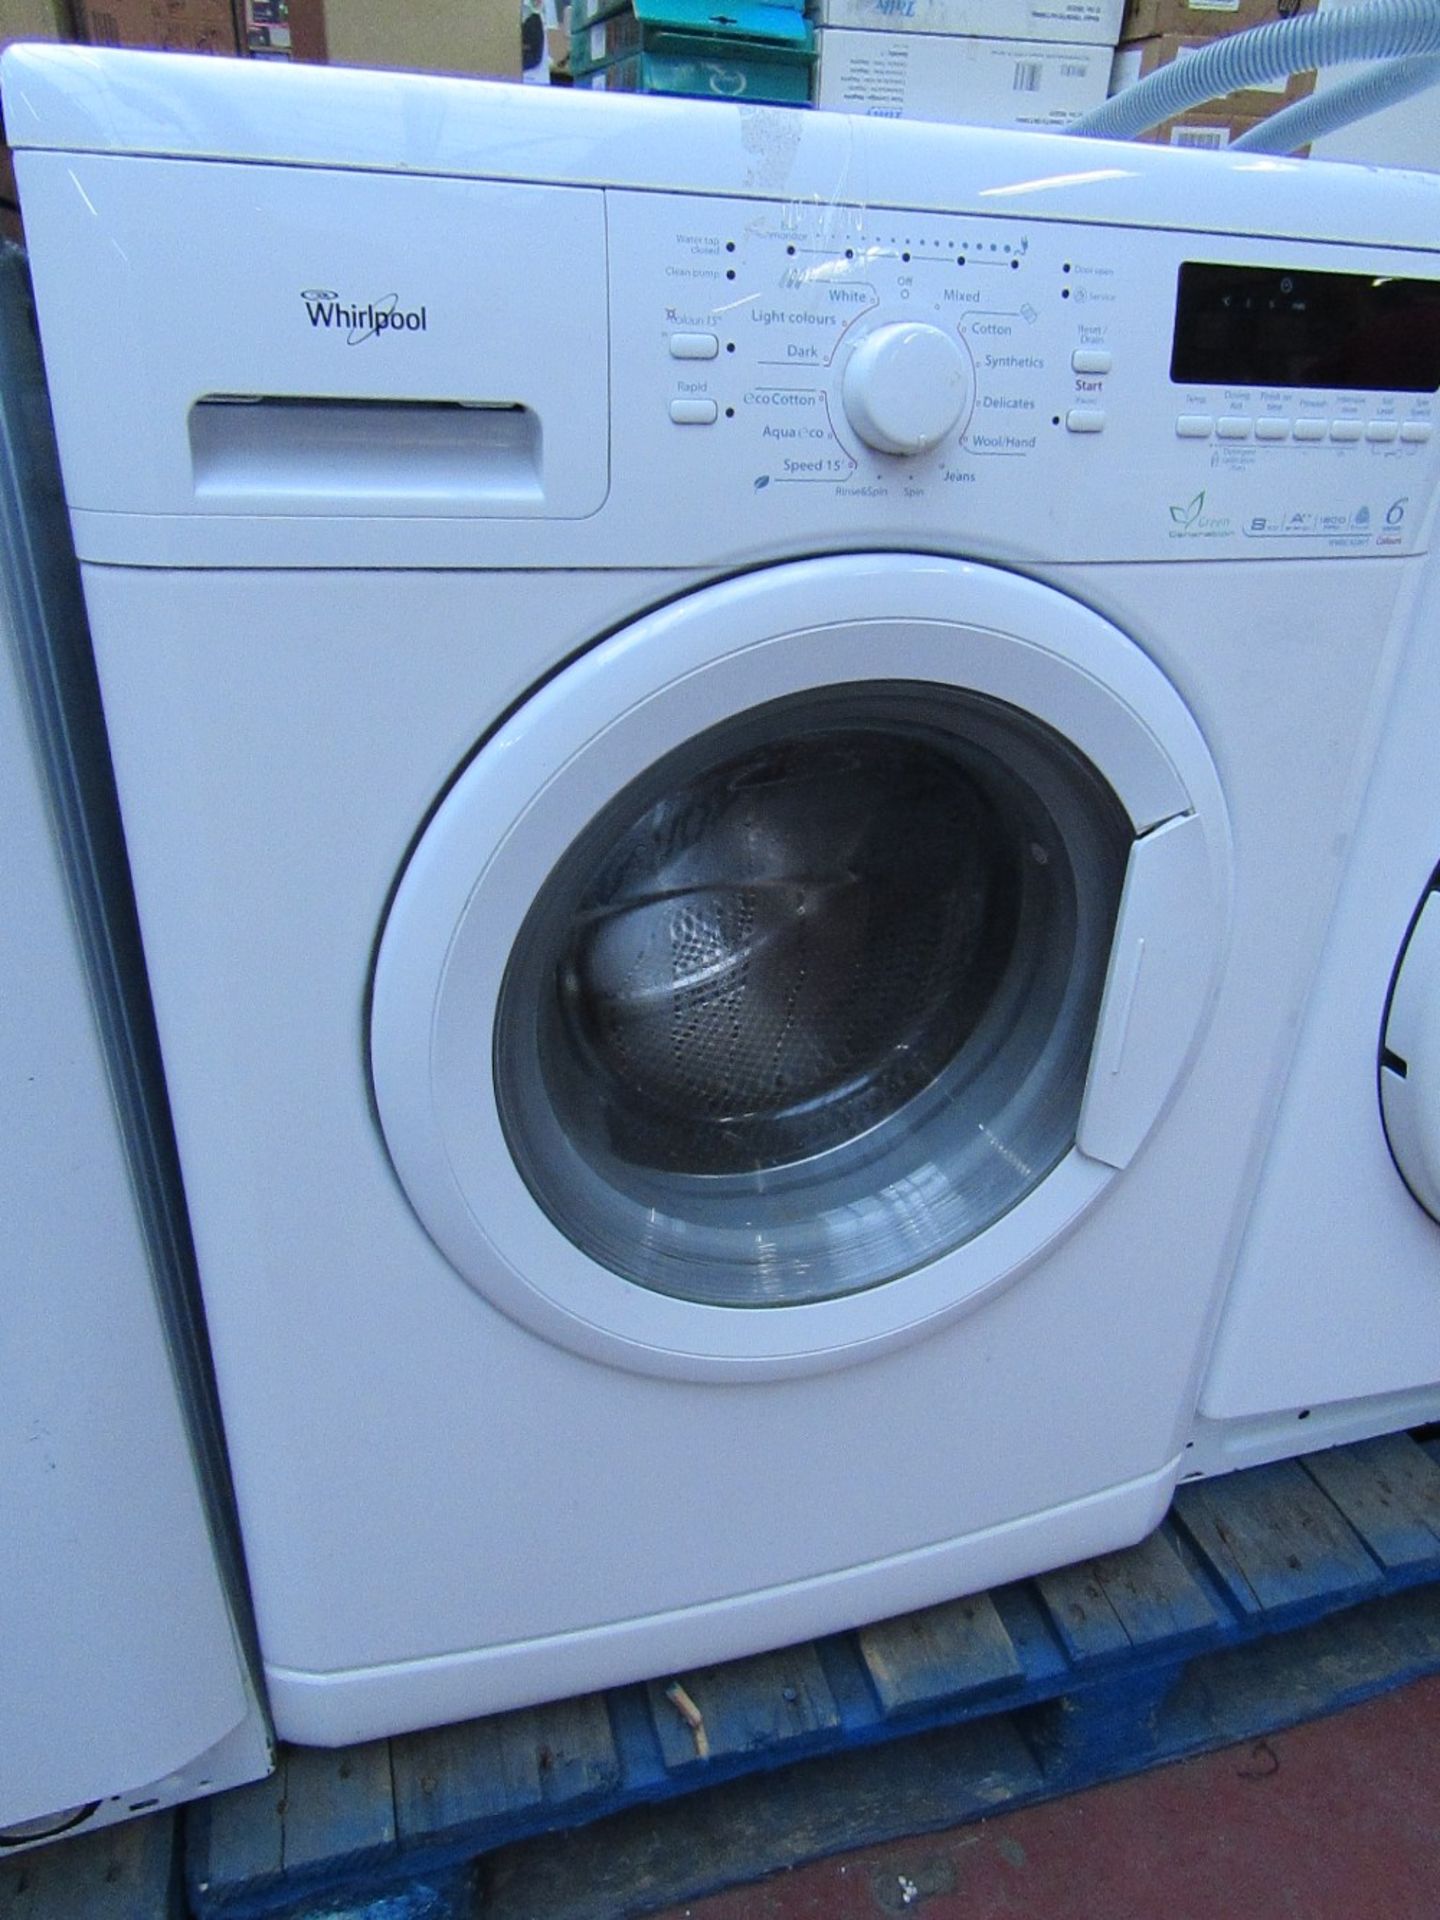 Whirlpool 6th Sense Colours washing machine, Powers on and Spins